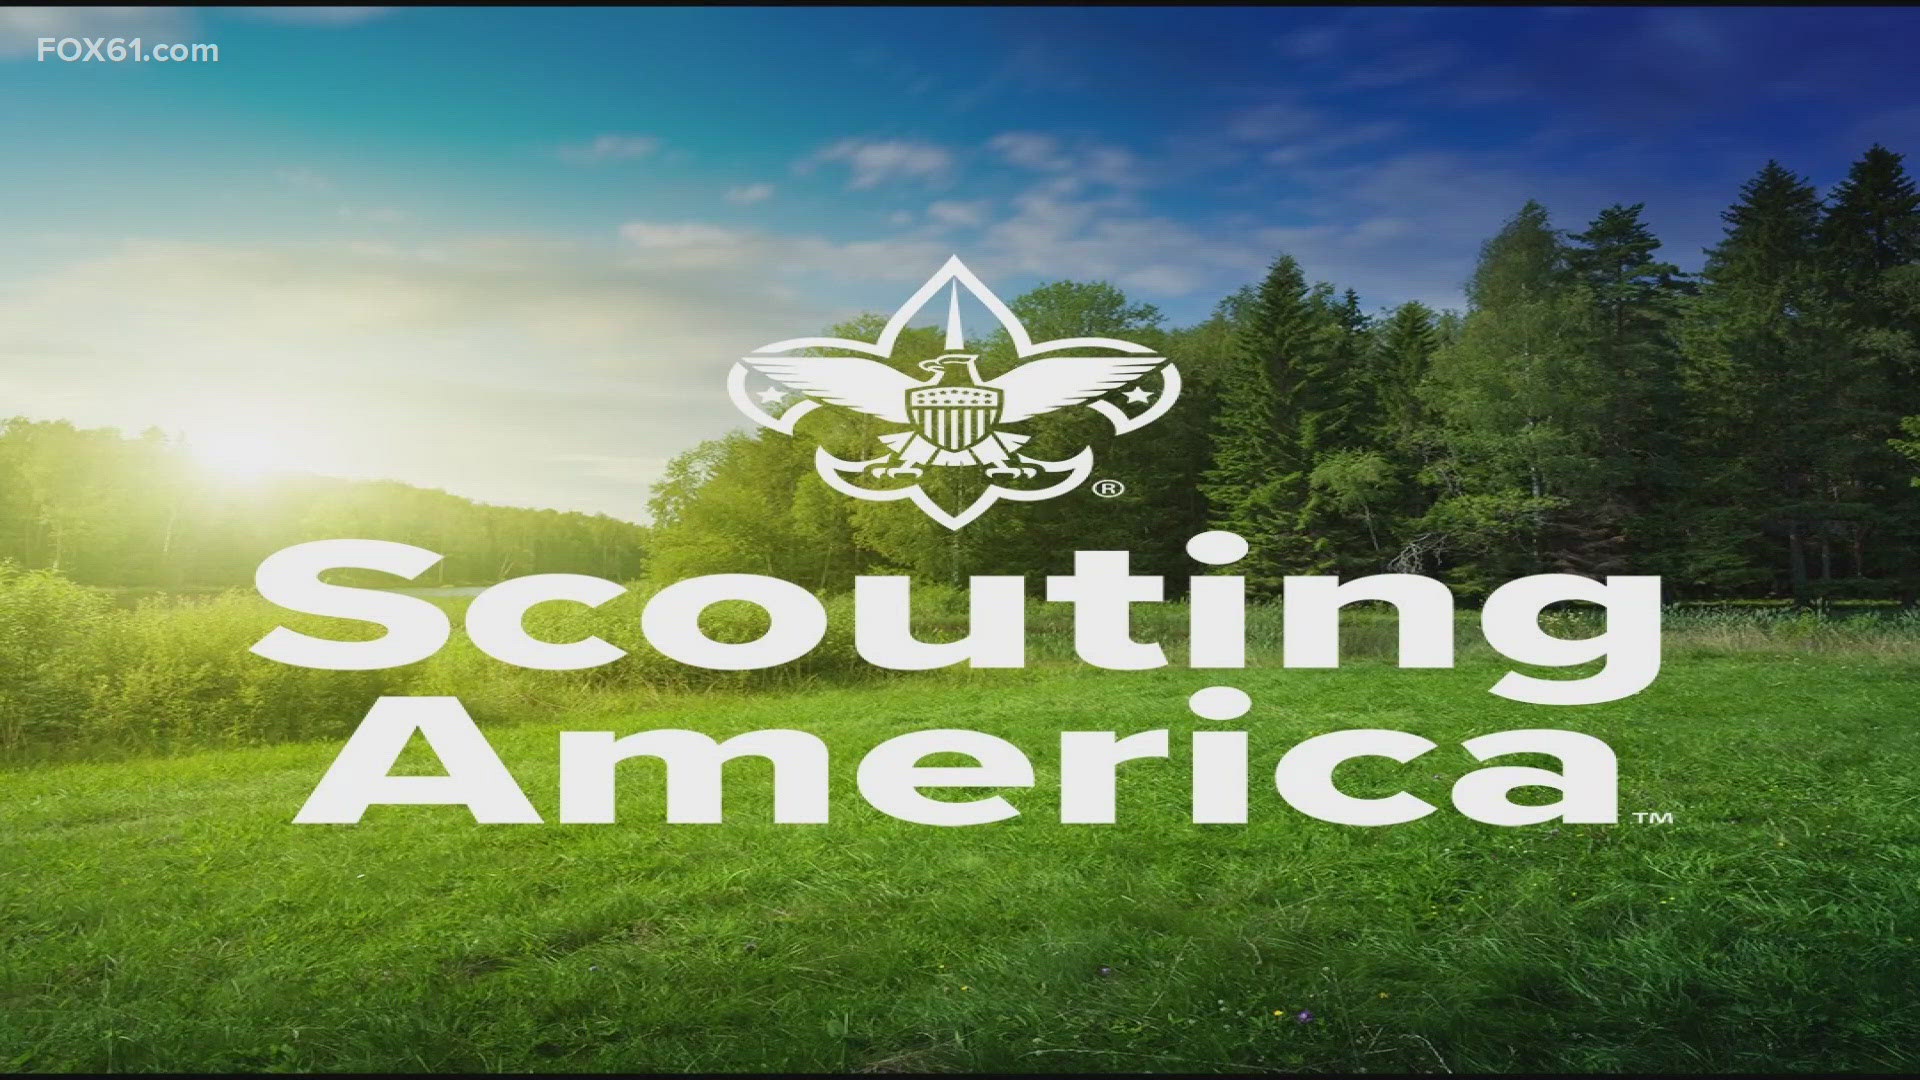 The Boy Scouts of America are rebranding to become more inclusive. They now refer to themselves as Scouting America. The name will officially change next February.